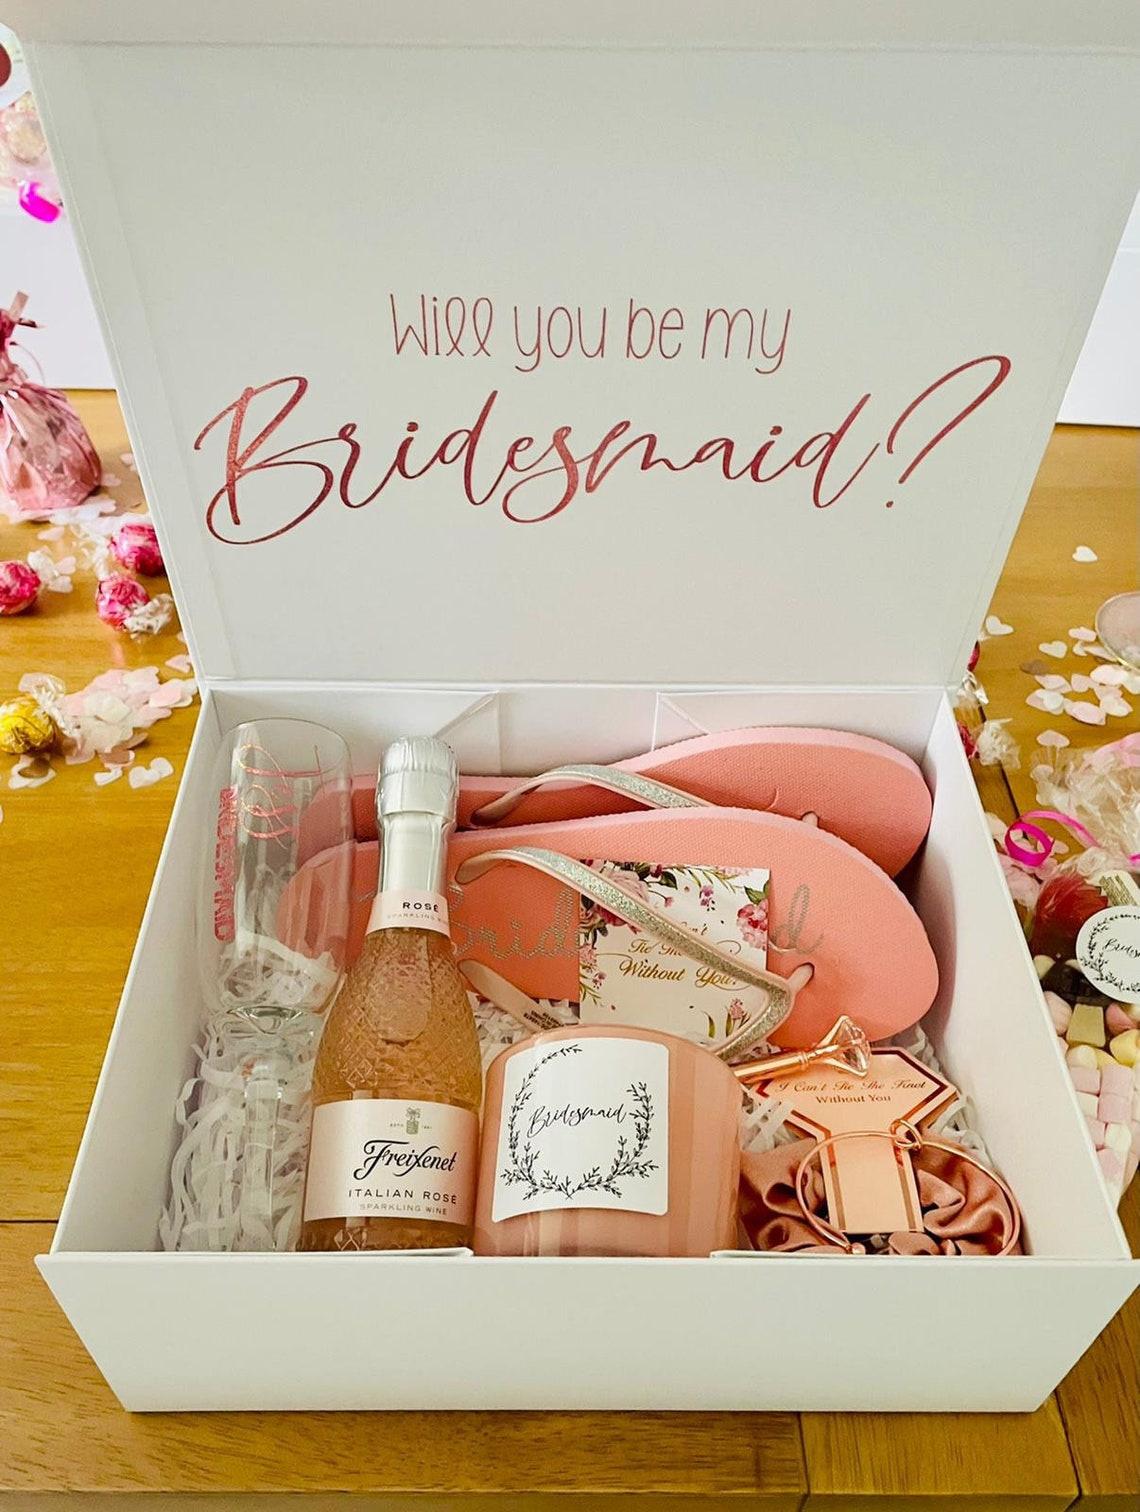 Will You Be My Bridesmaid Box/Bridesmaid Proposal Box/Maid of Honor Proposal Box/Includes the Printing of 13 Photos of Your Choice to Personalize It 